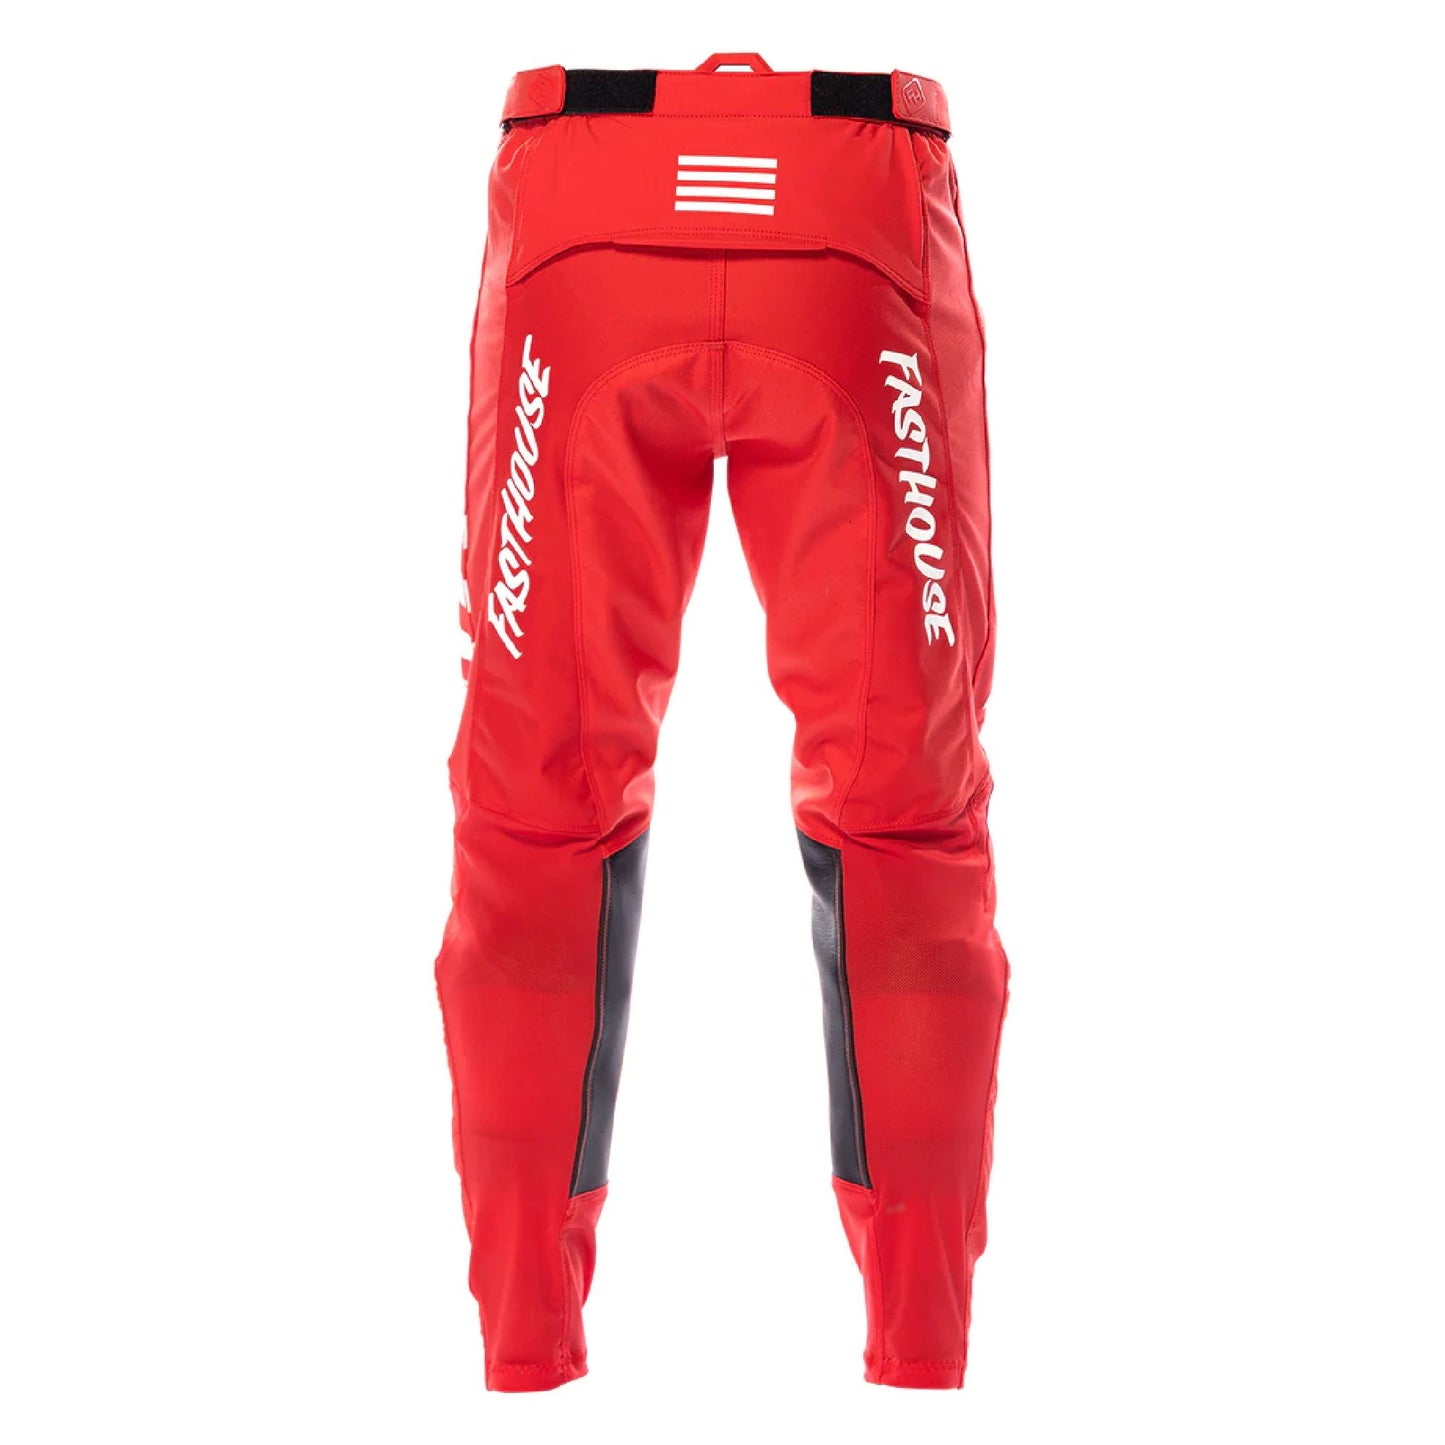 Fasthouse Elrod Pant Red Bike Pants